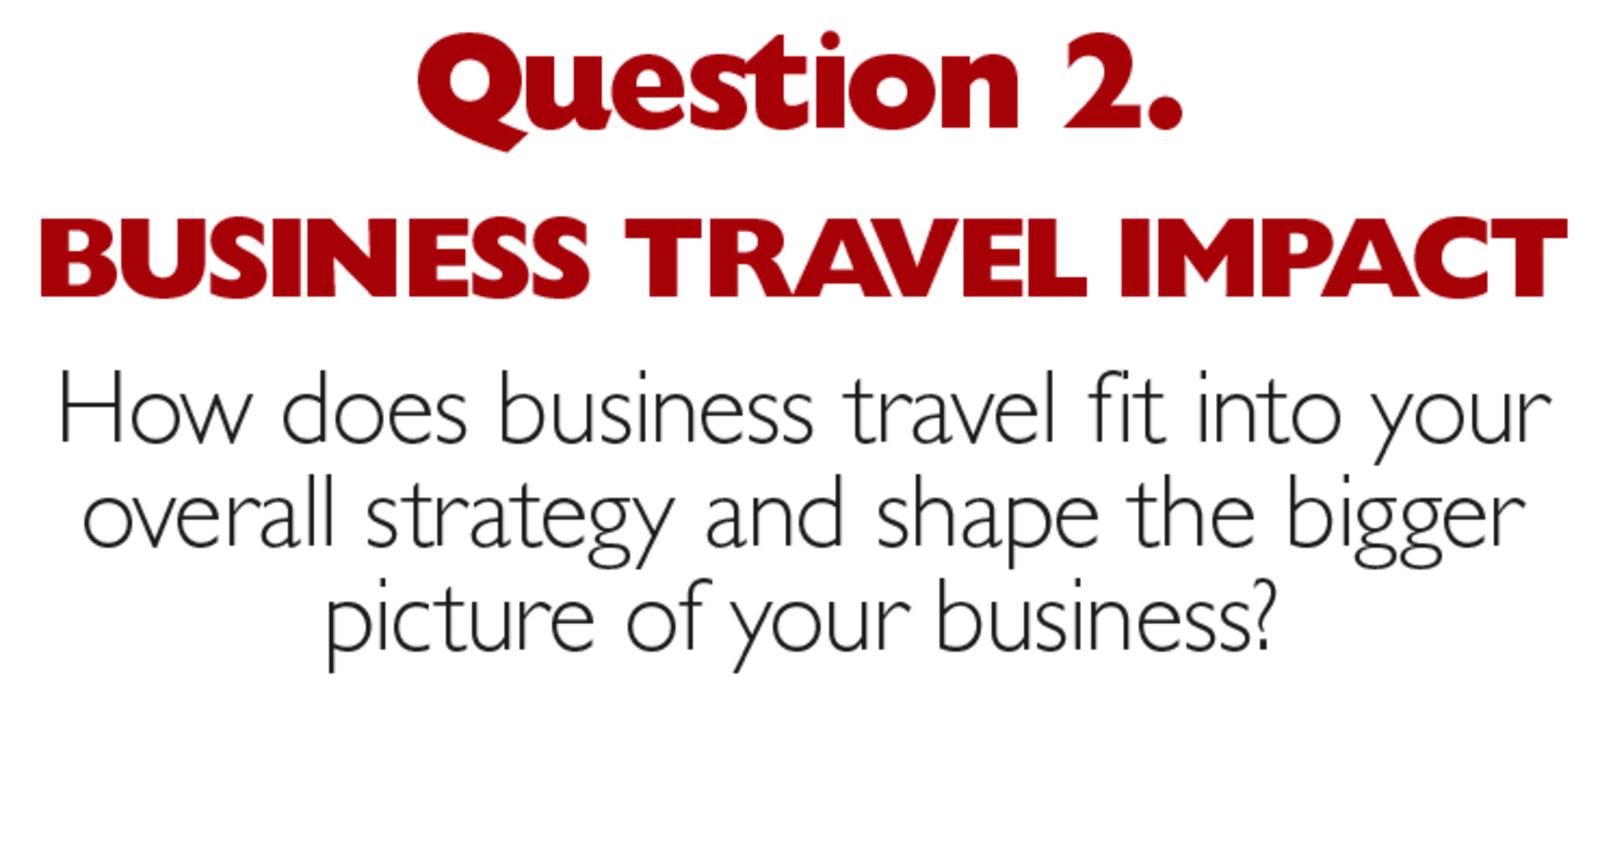 Question 2. Business travel impact. How does business travel fit into your overall strategy and shape the bigger picture of your business?